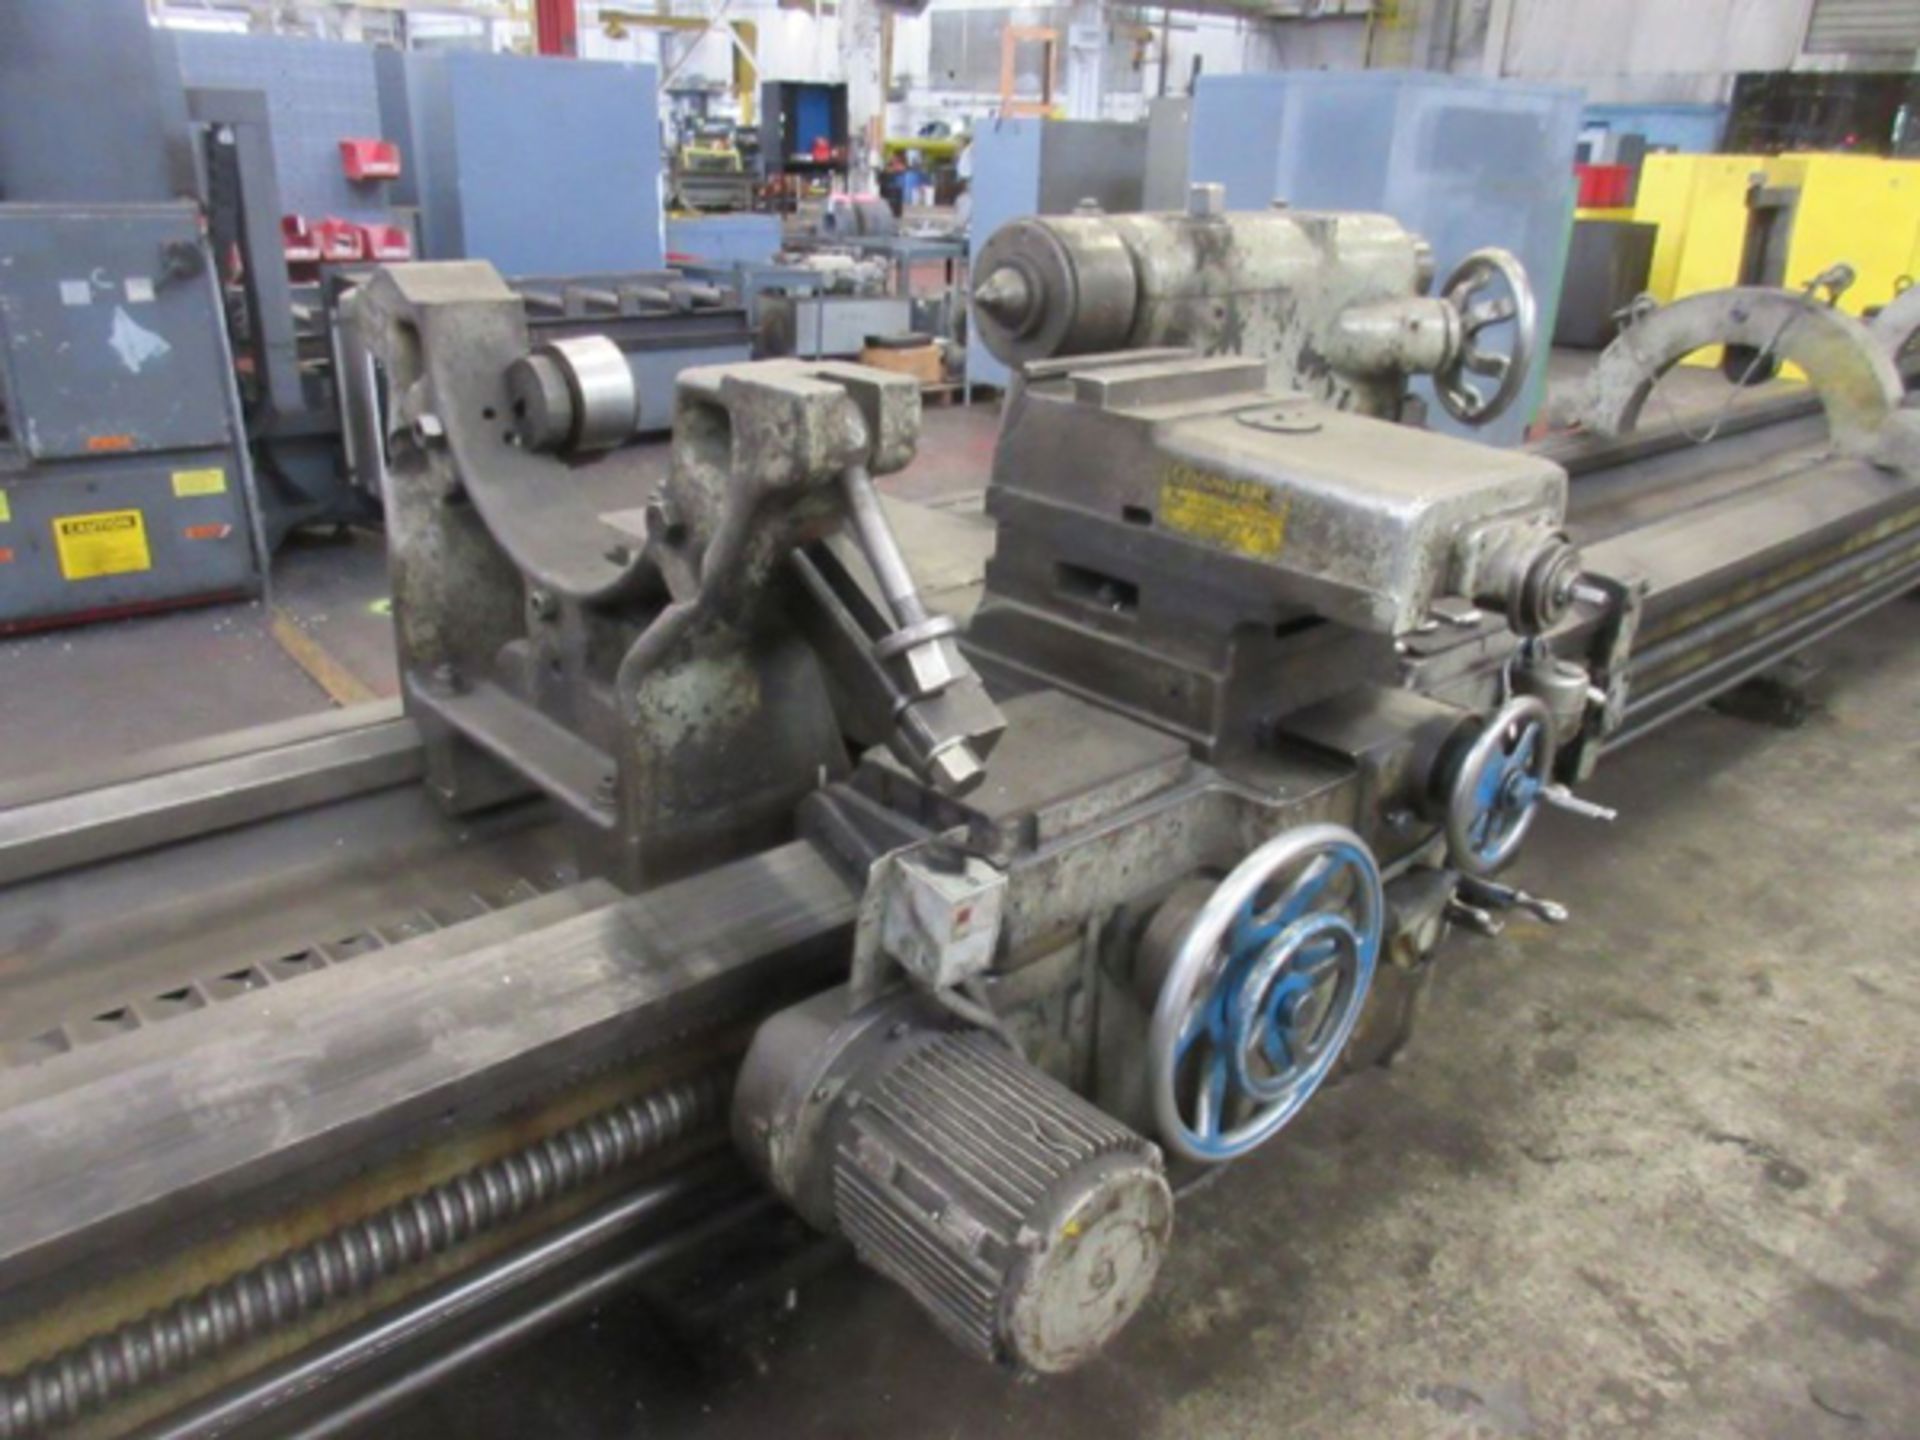 52" Swing x 58' Center Engine Lathe Leblond Dual Carriage Heavy Duty 100 HP - Located In: Pomona, CA - Image 5 of 8